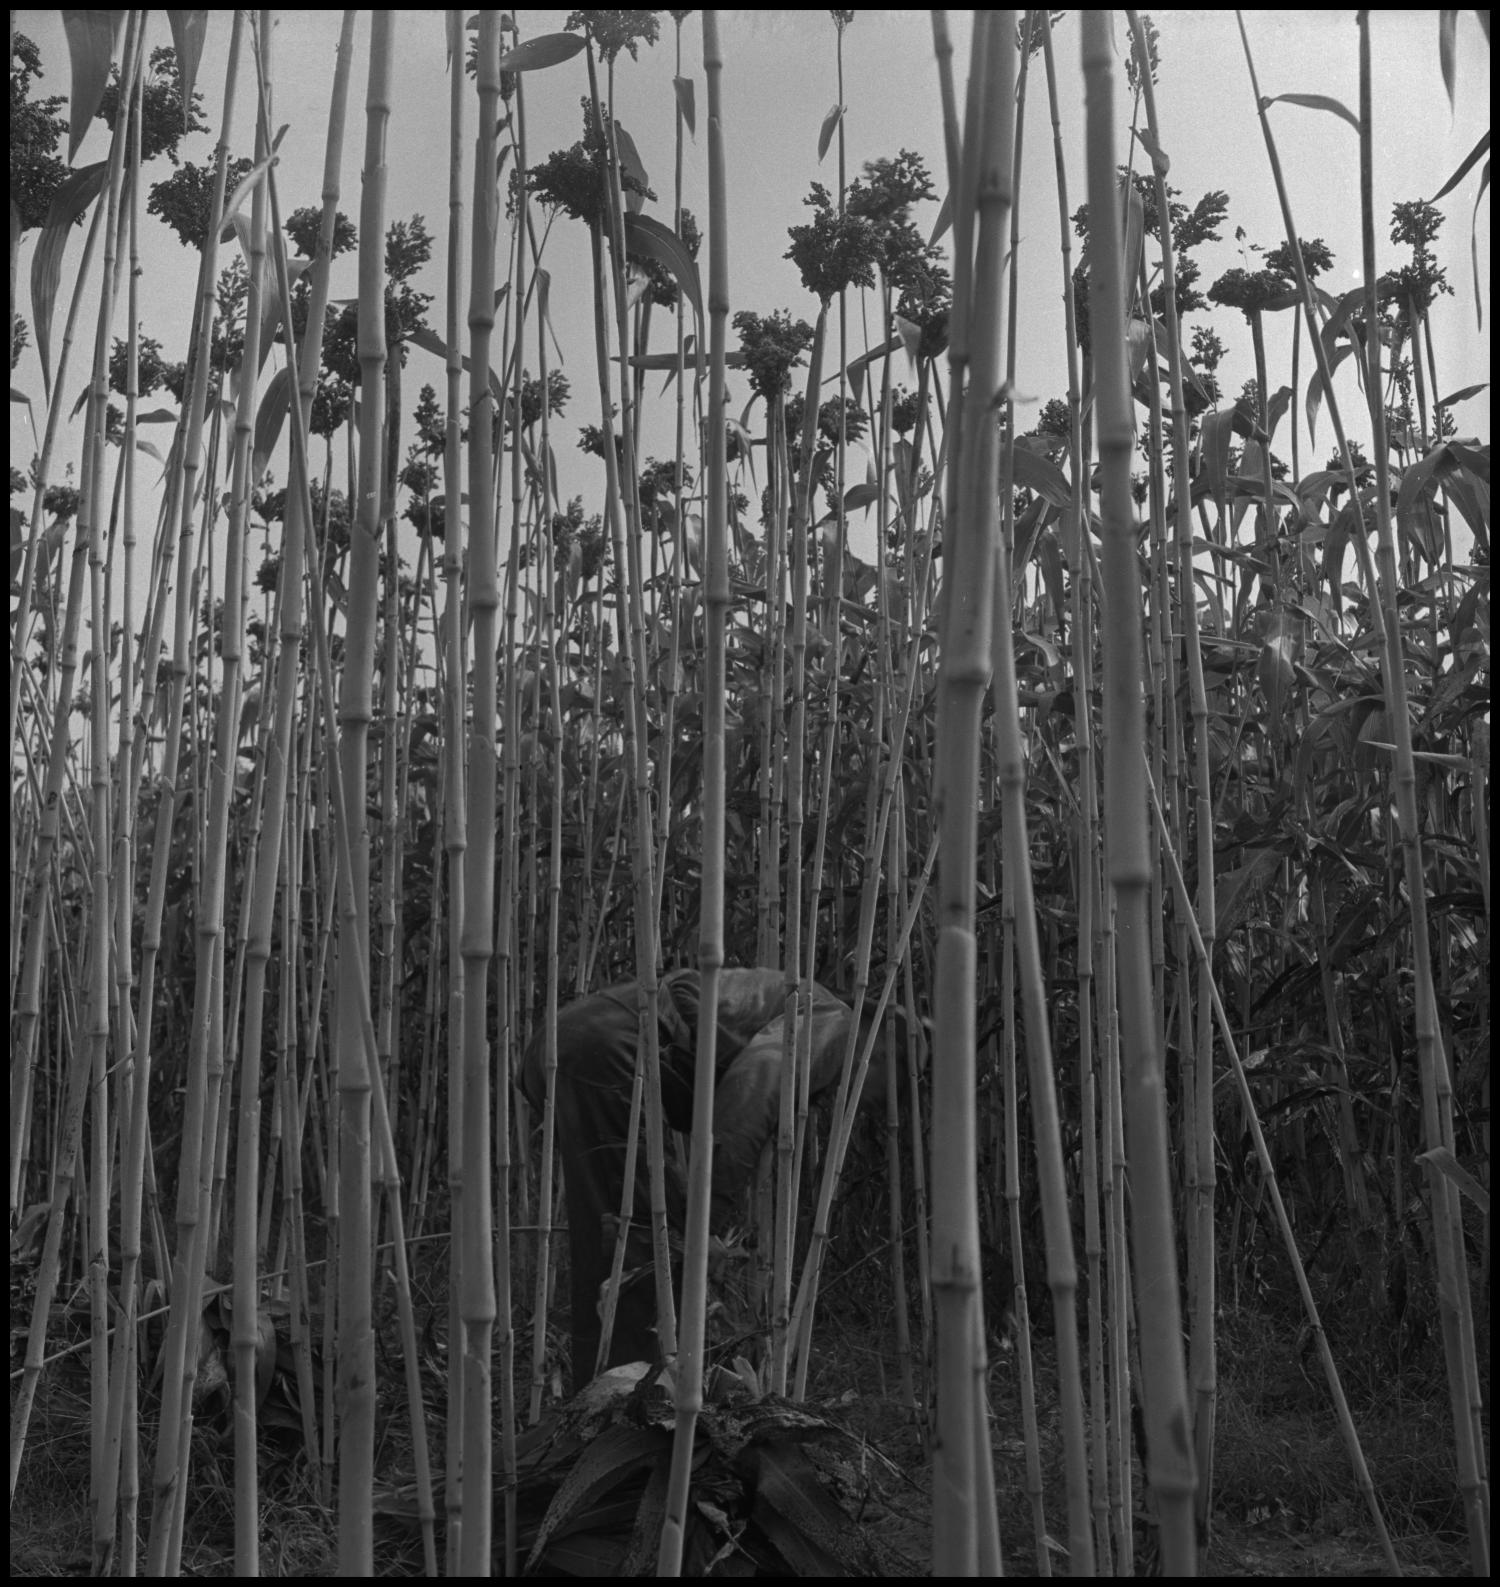 [Man in sorghum cane field]
                                                
                                                    [Sequence #]: 1 of 1
                                                